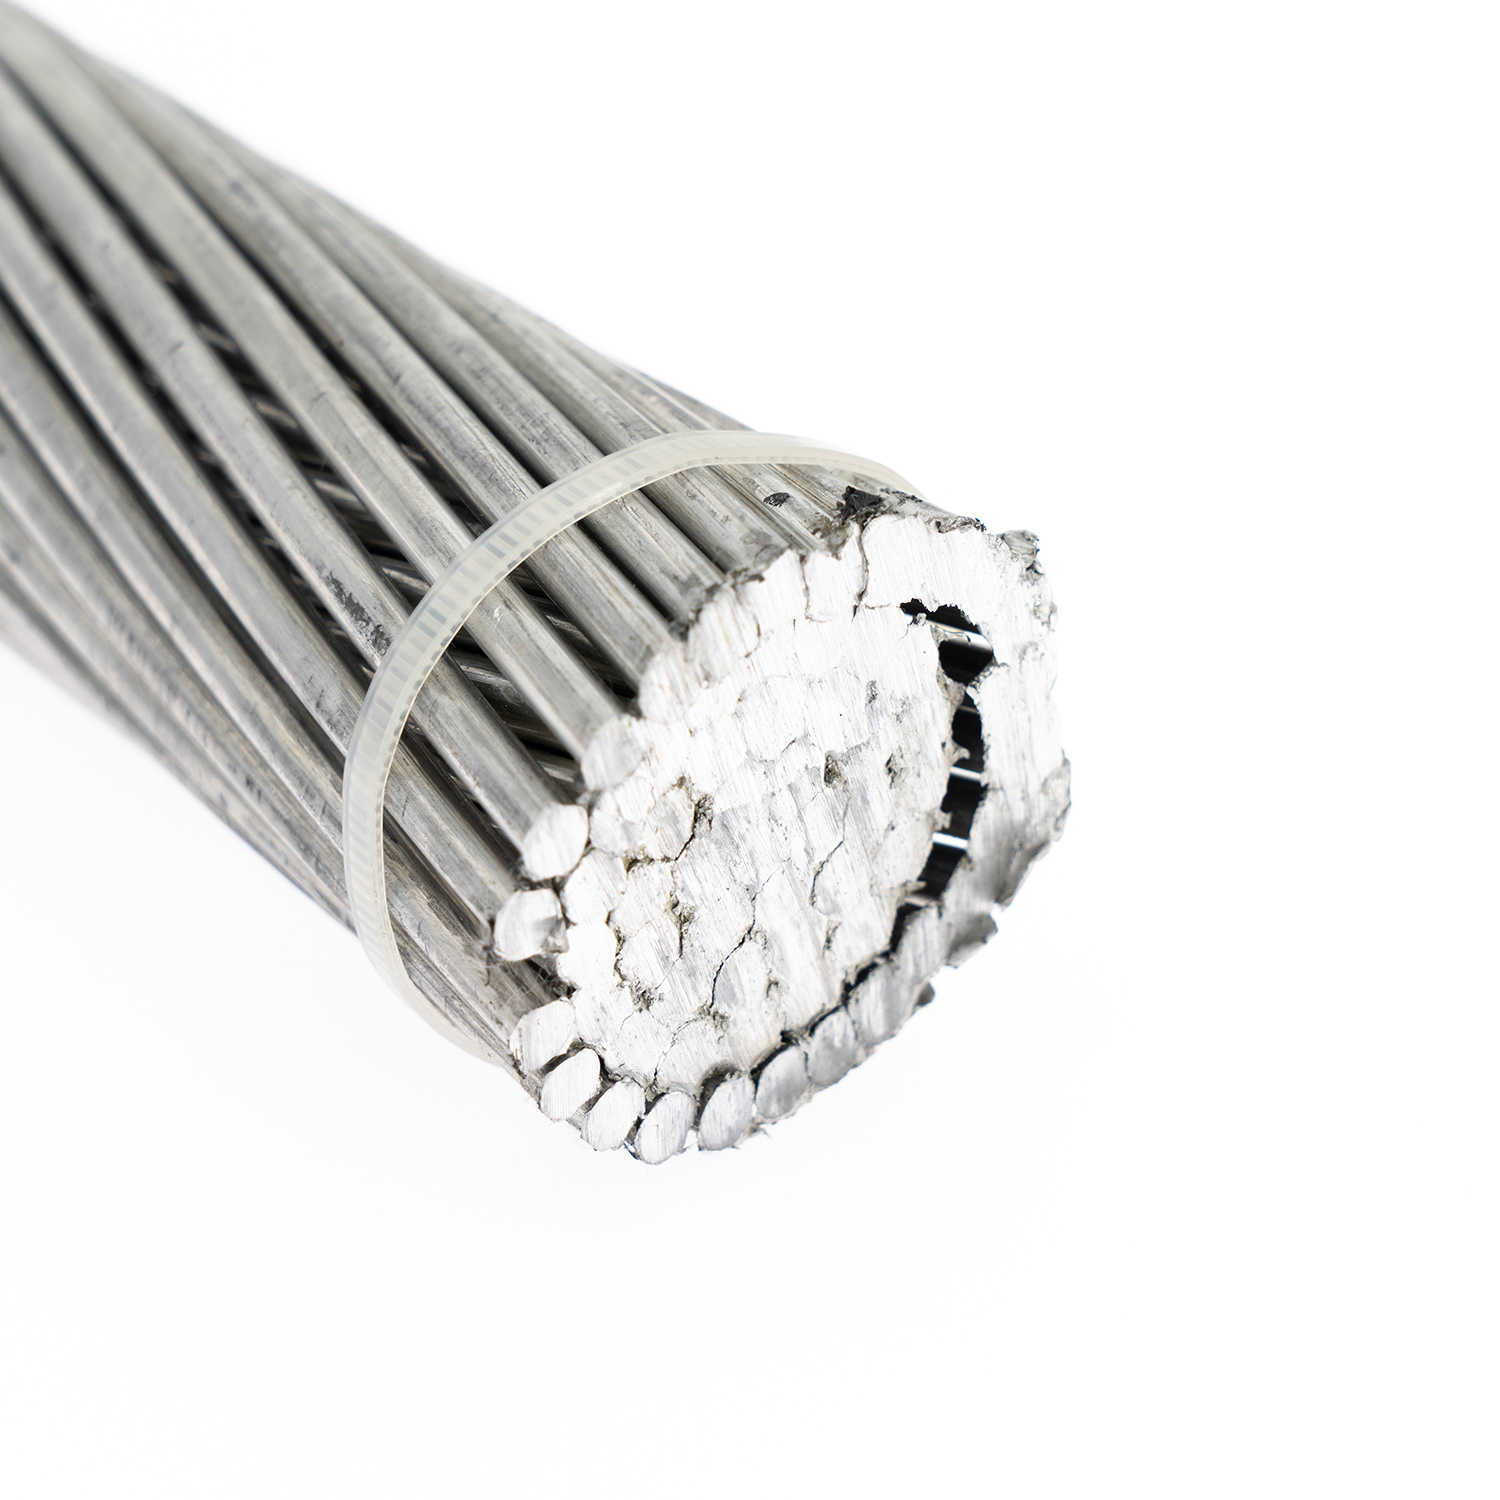 75mm2 AAC Overhead Stranded Transmission Line Aluminum Conductor